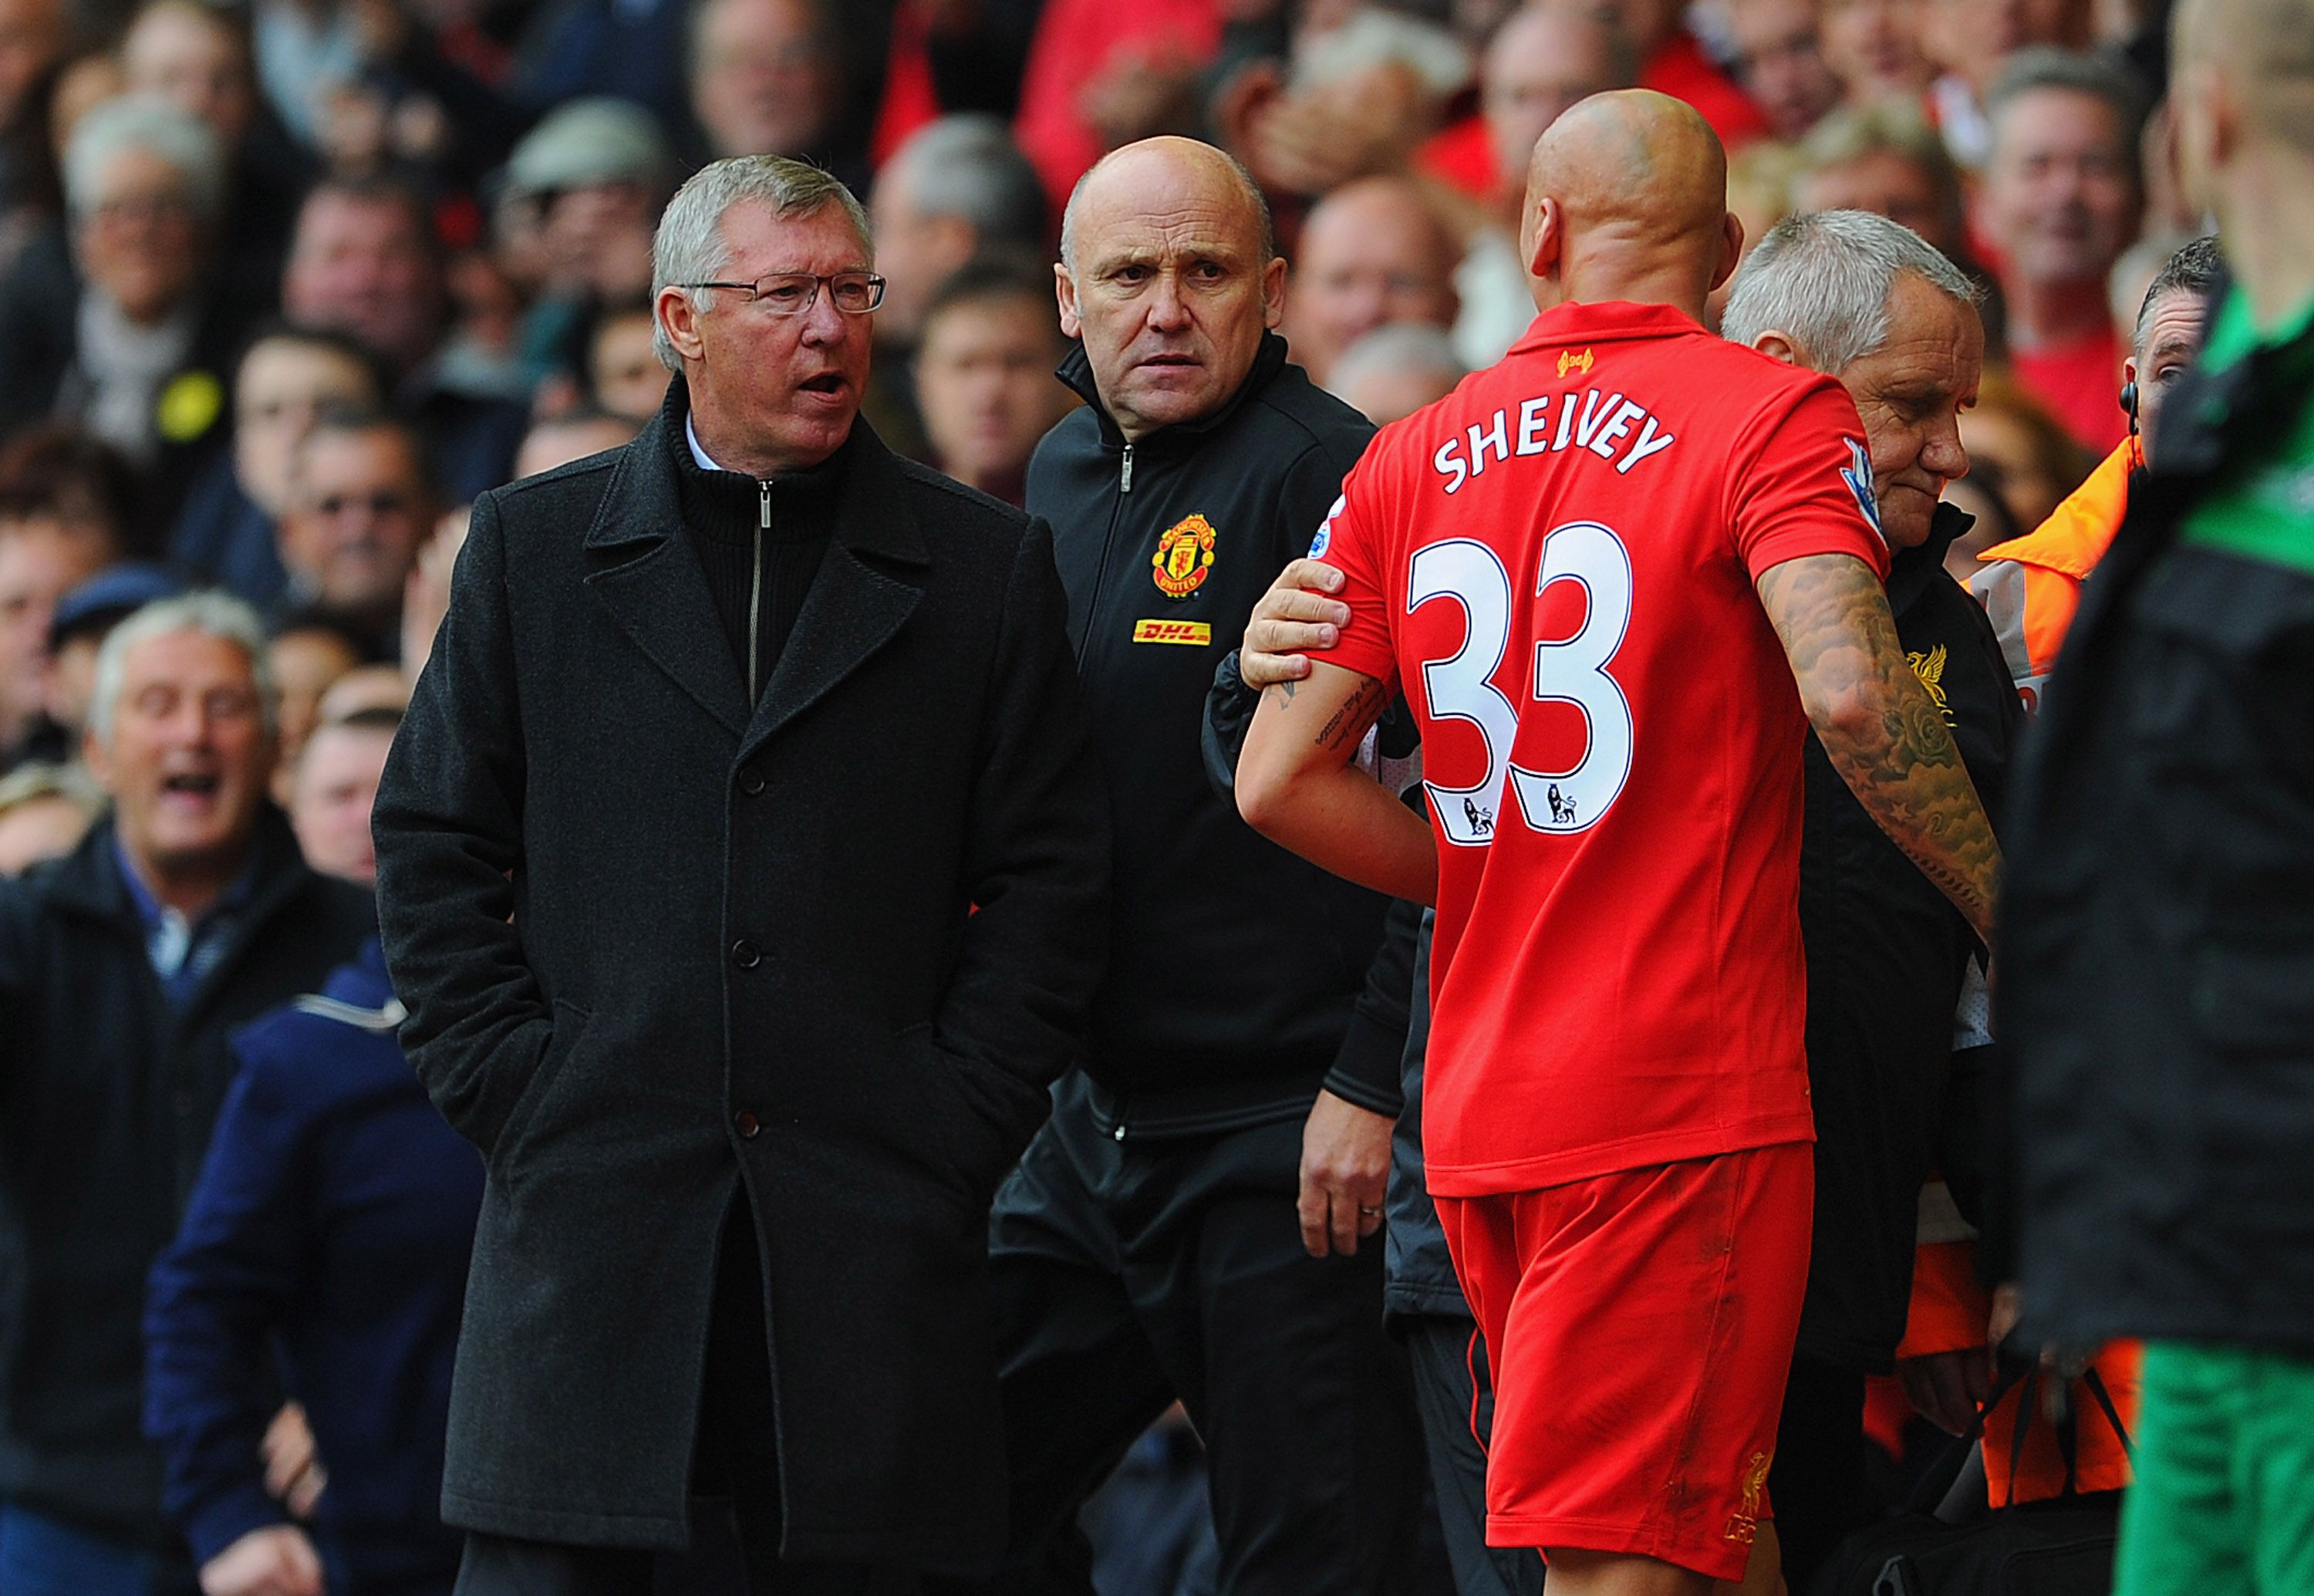 LIVERPOOL, ENGLAND - SEPTEMBER 23: Jonjo Shelvey of Liverpool argues with Manchester United manager Sir Alex Ferguson after being sent off during the Barclays Premier League match between Liverpool and Manchester United at Anfield on September 23, 2012 in Liverpool, England. (Photo by Michael Regan/Getty Images)